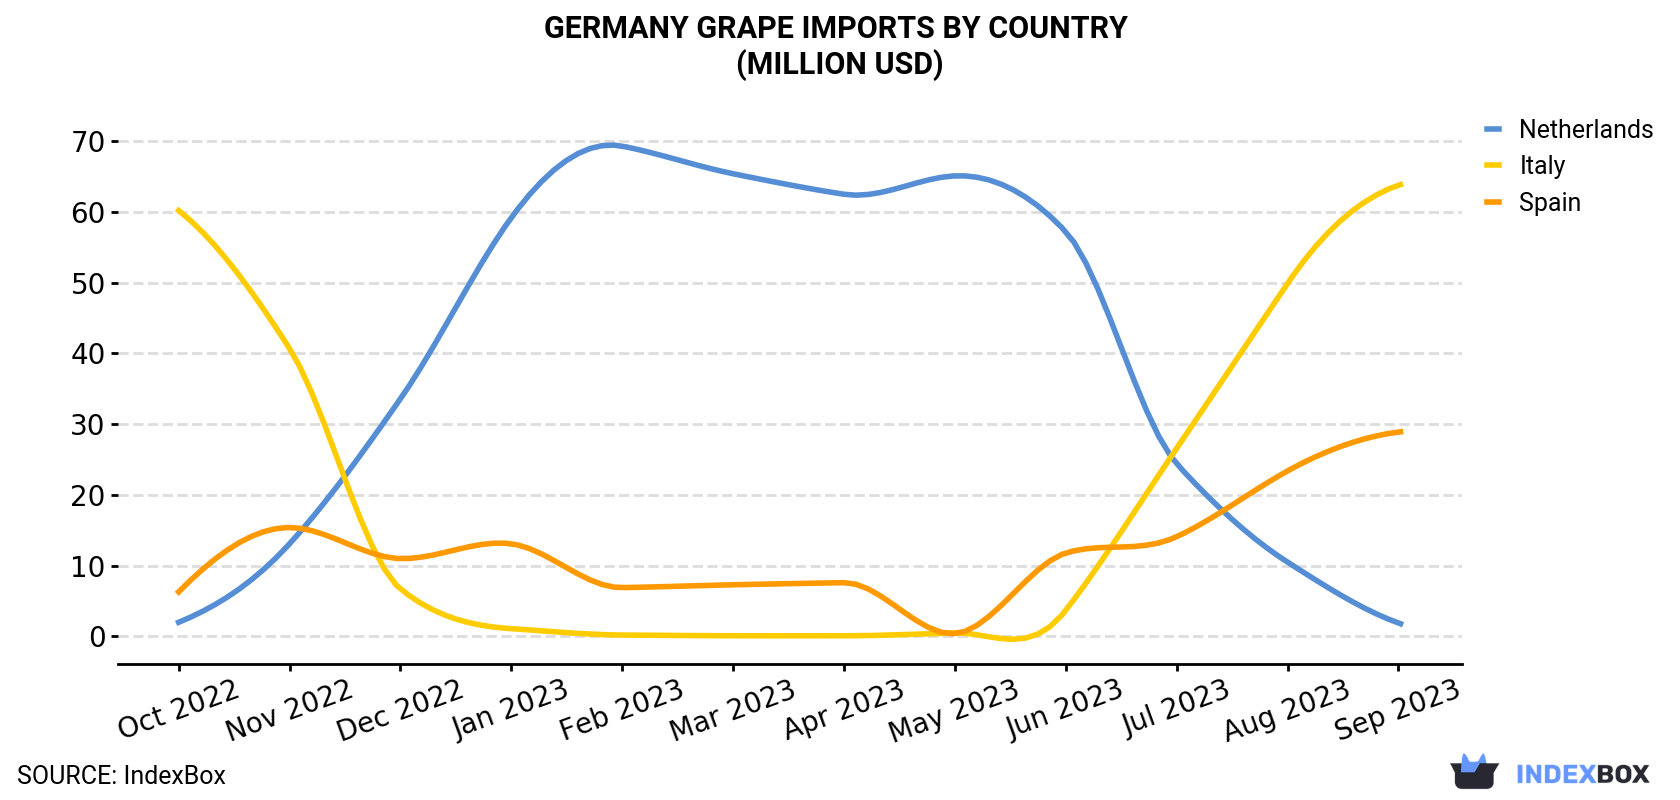 Germany Grape Imports By Country (Million USD)